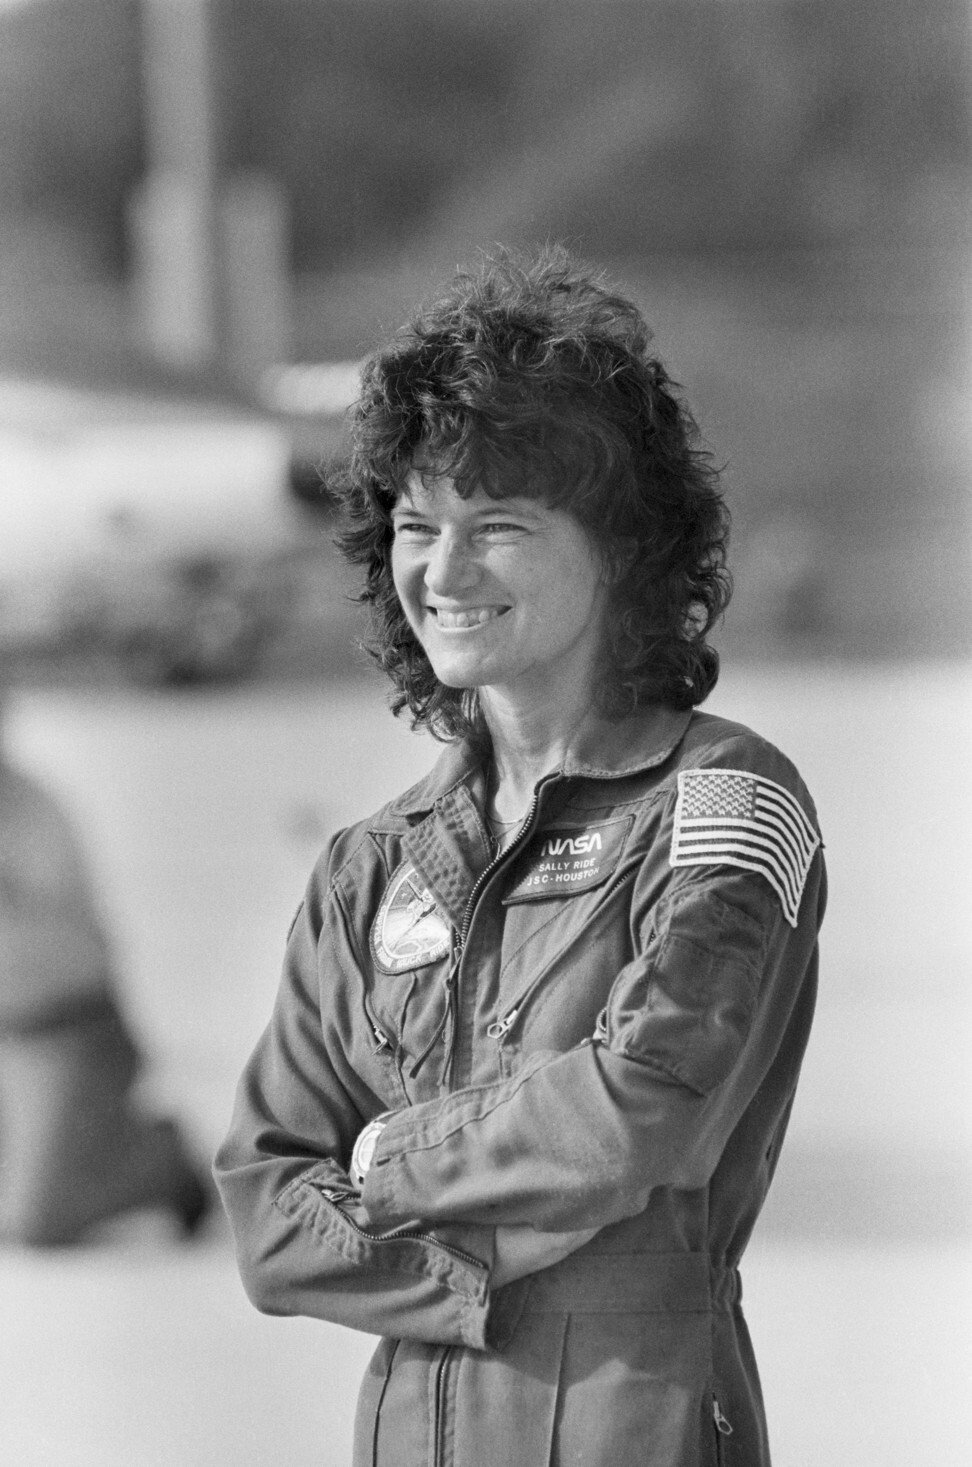 Sally Ride became the first American woman in space in 1983. Photo: Bettman Archive